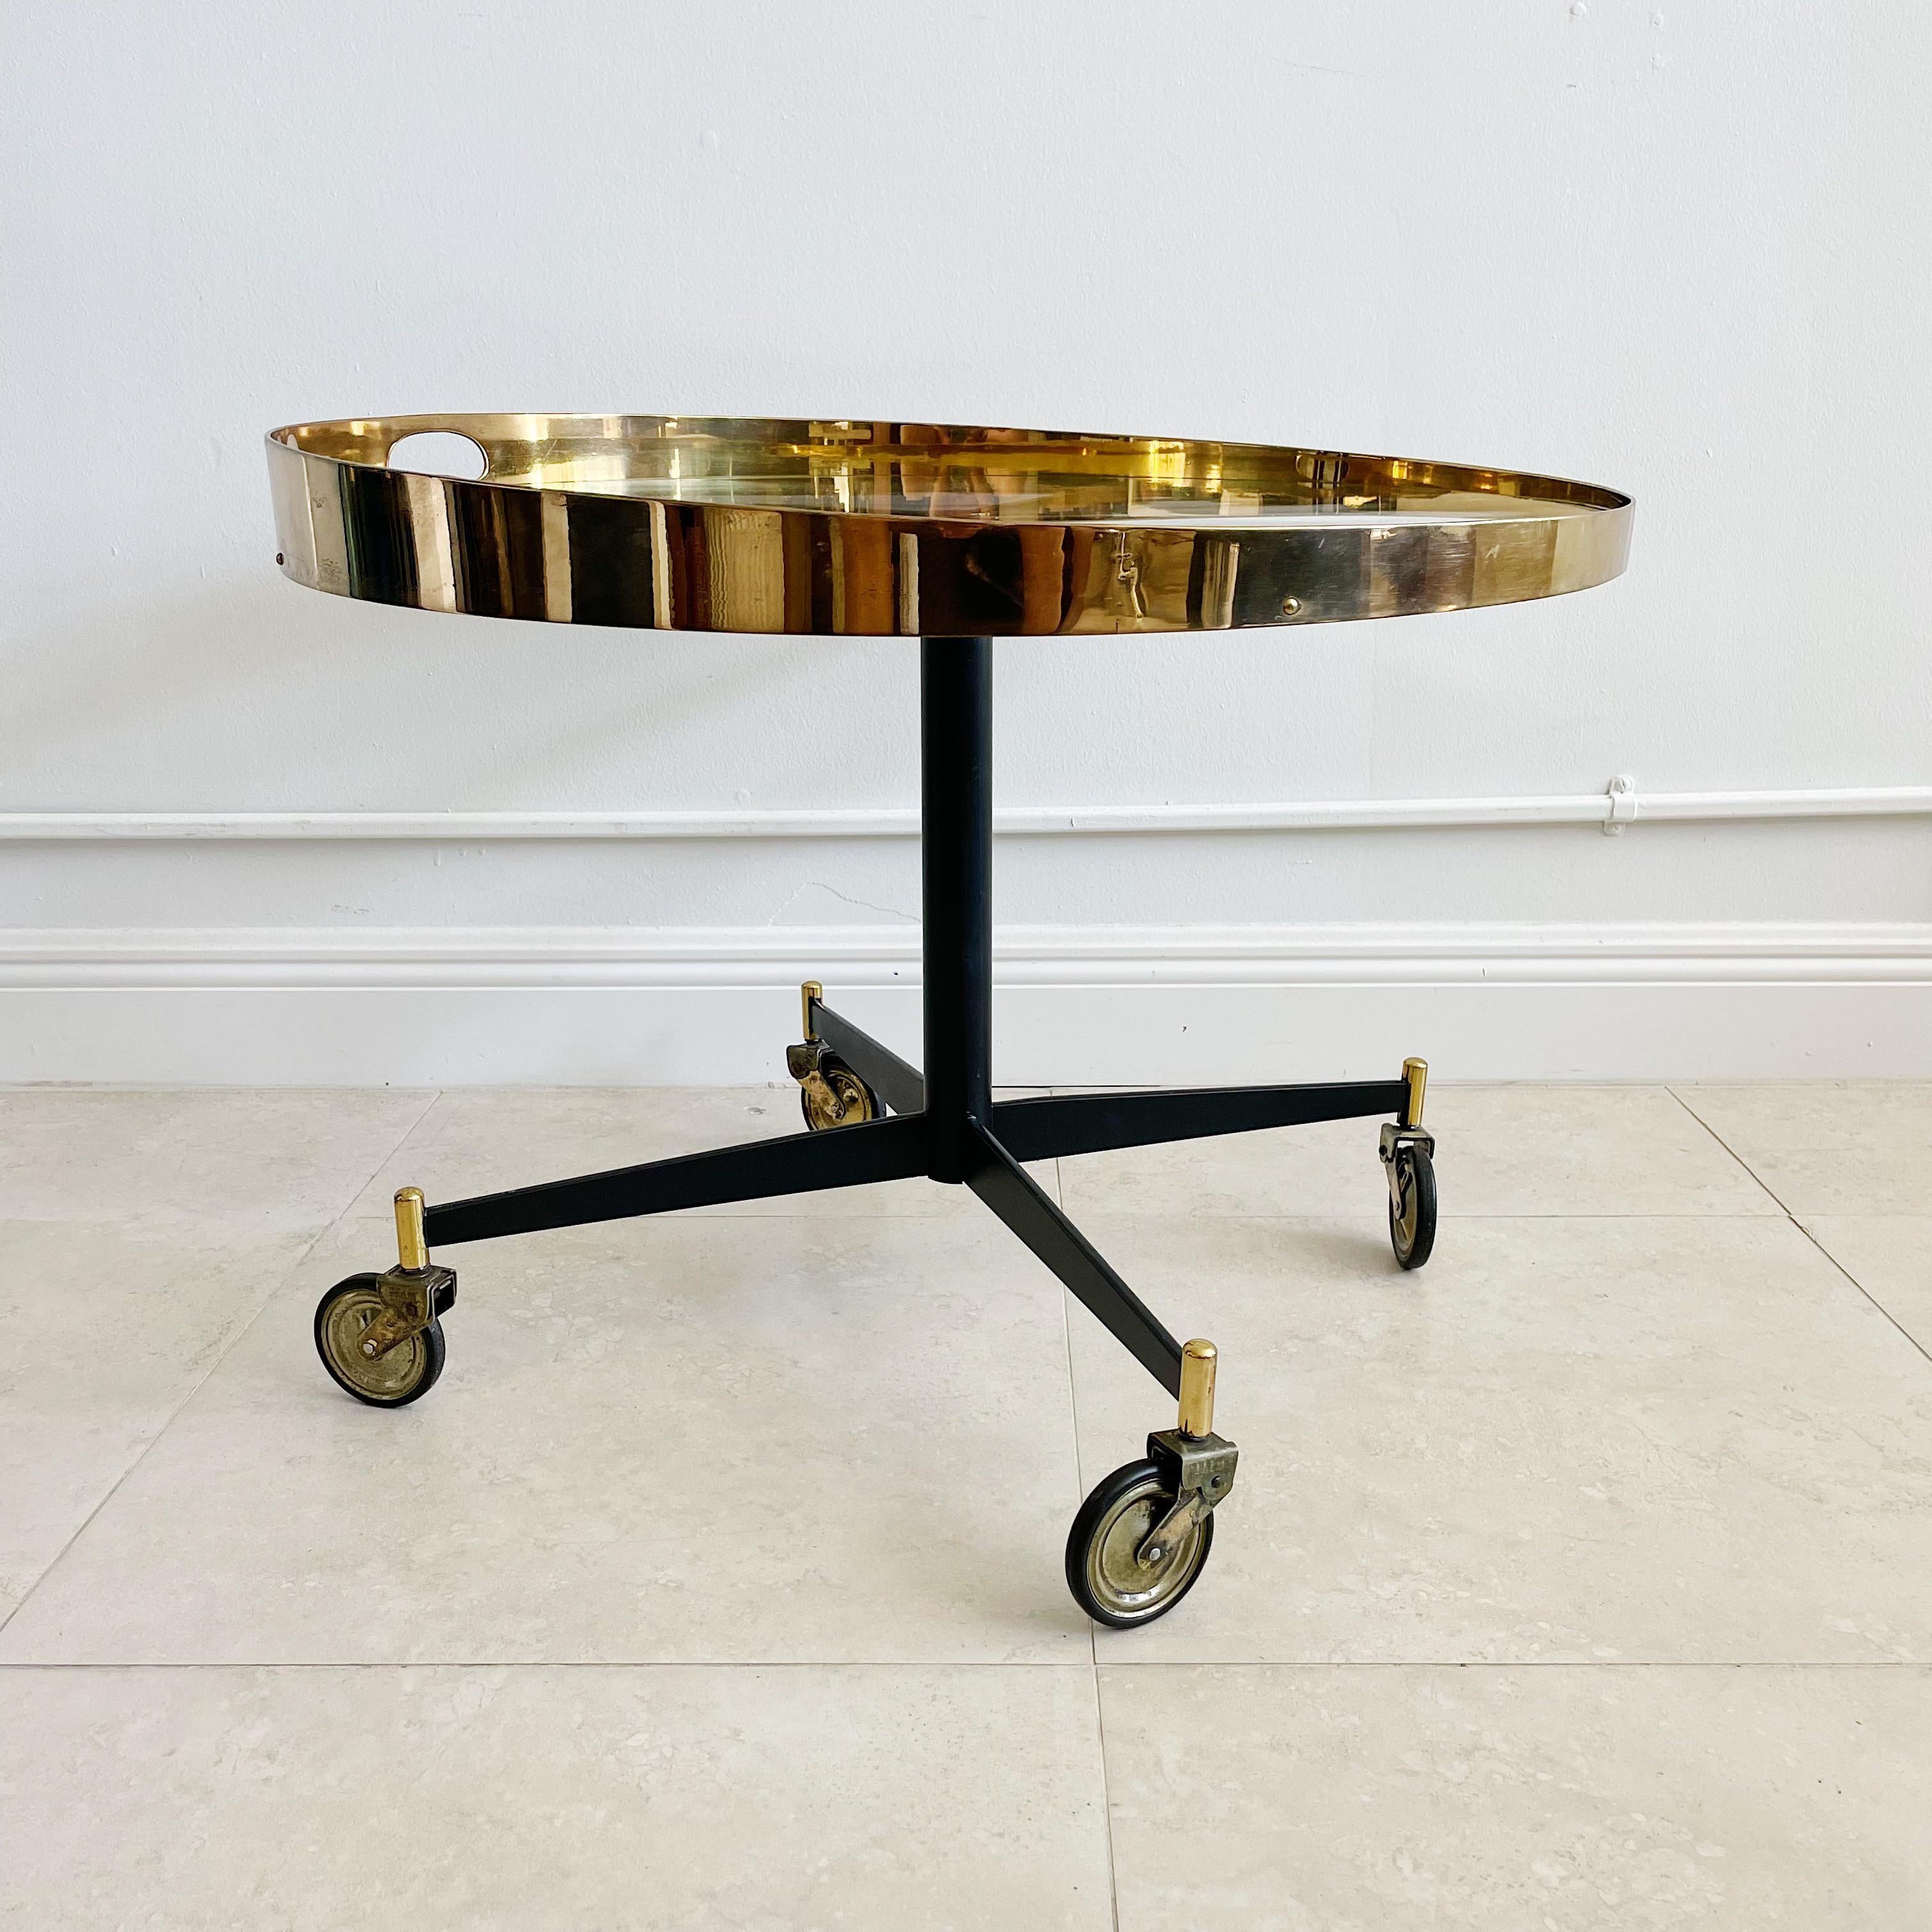 Unique Italian circular side table, bar table on wheels from the 1950's.